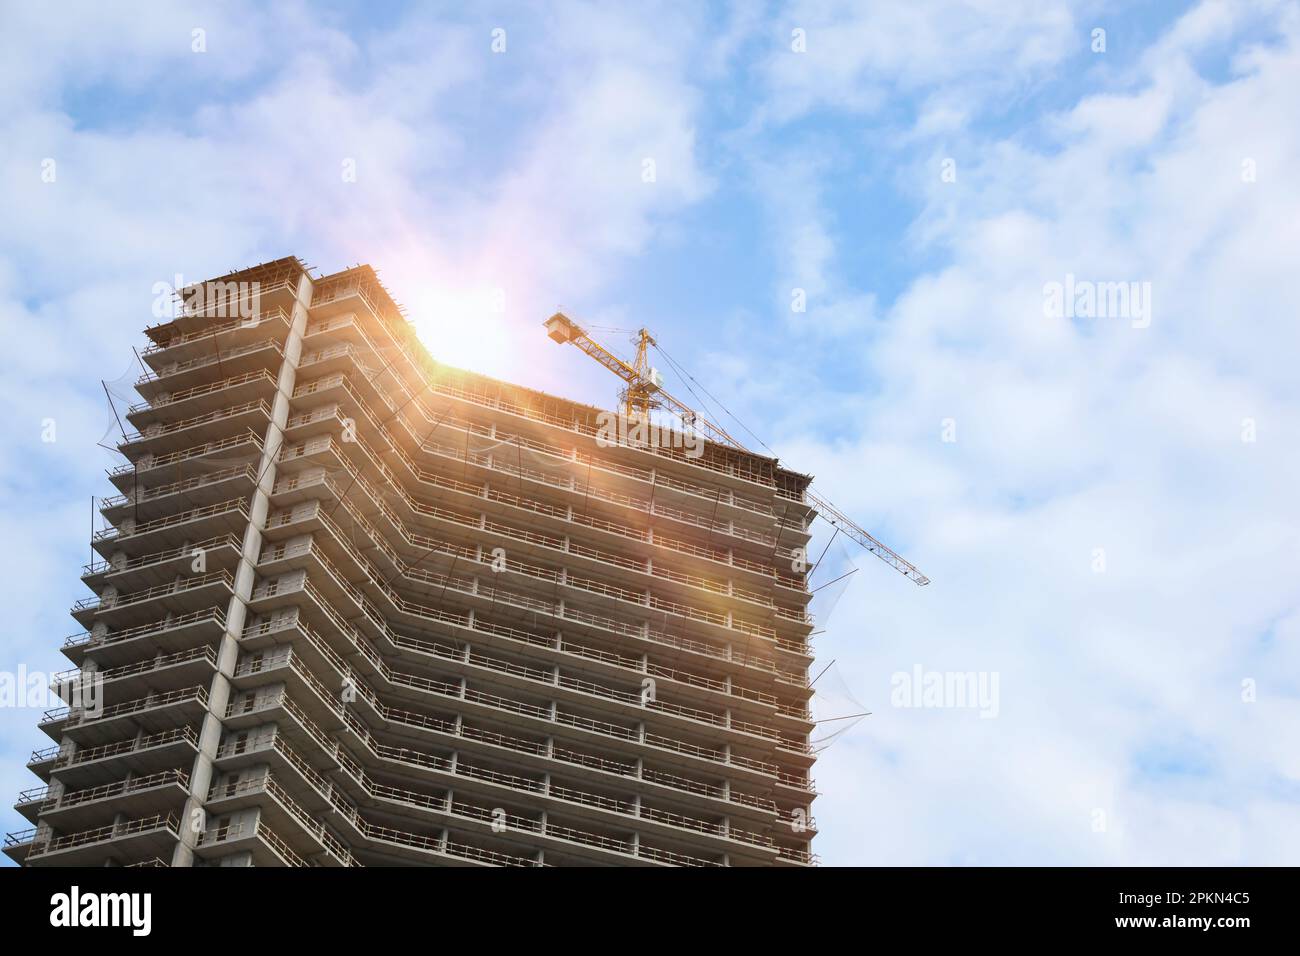 Multistoried residential building and construction crane outdoors, low angle view Stock Photo